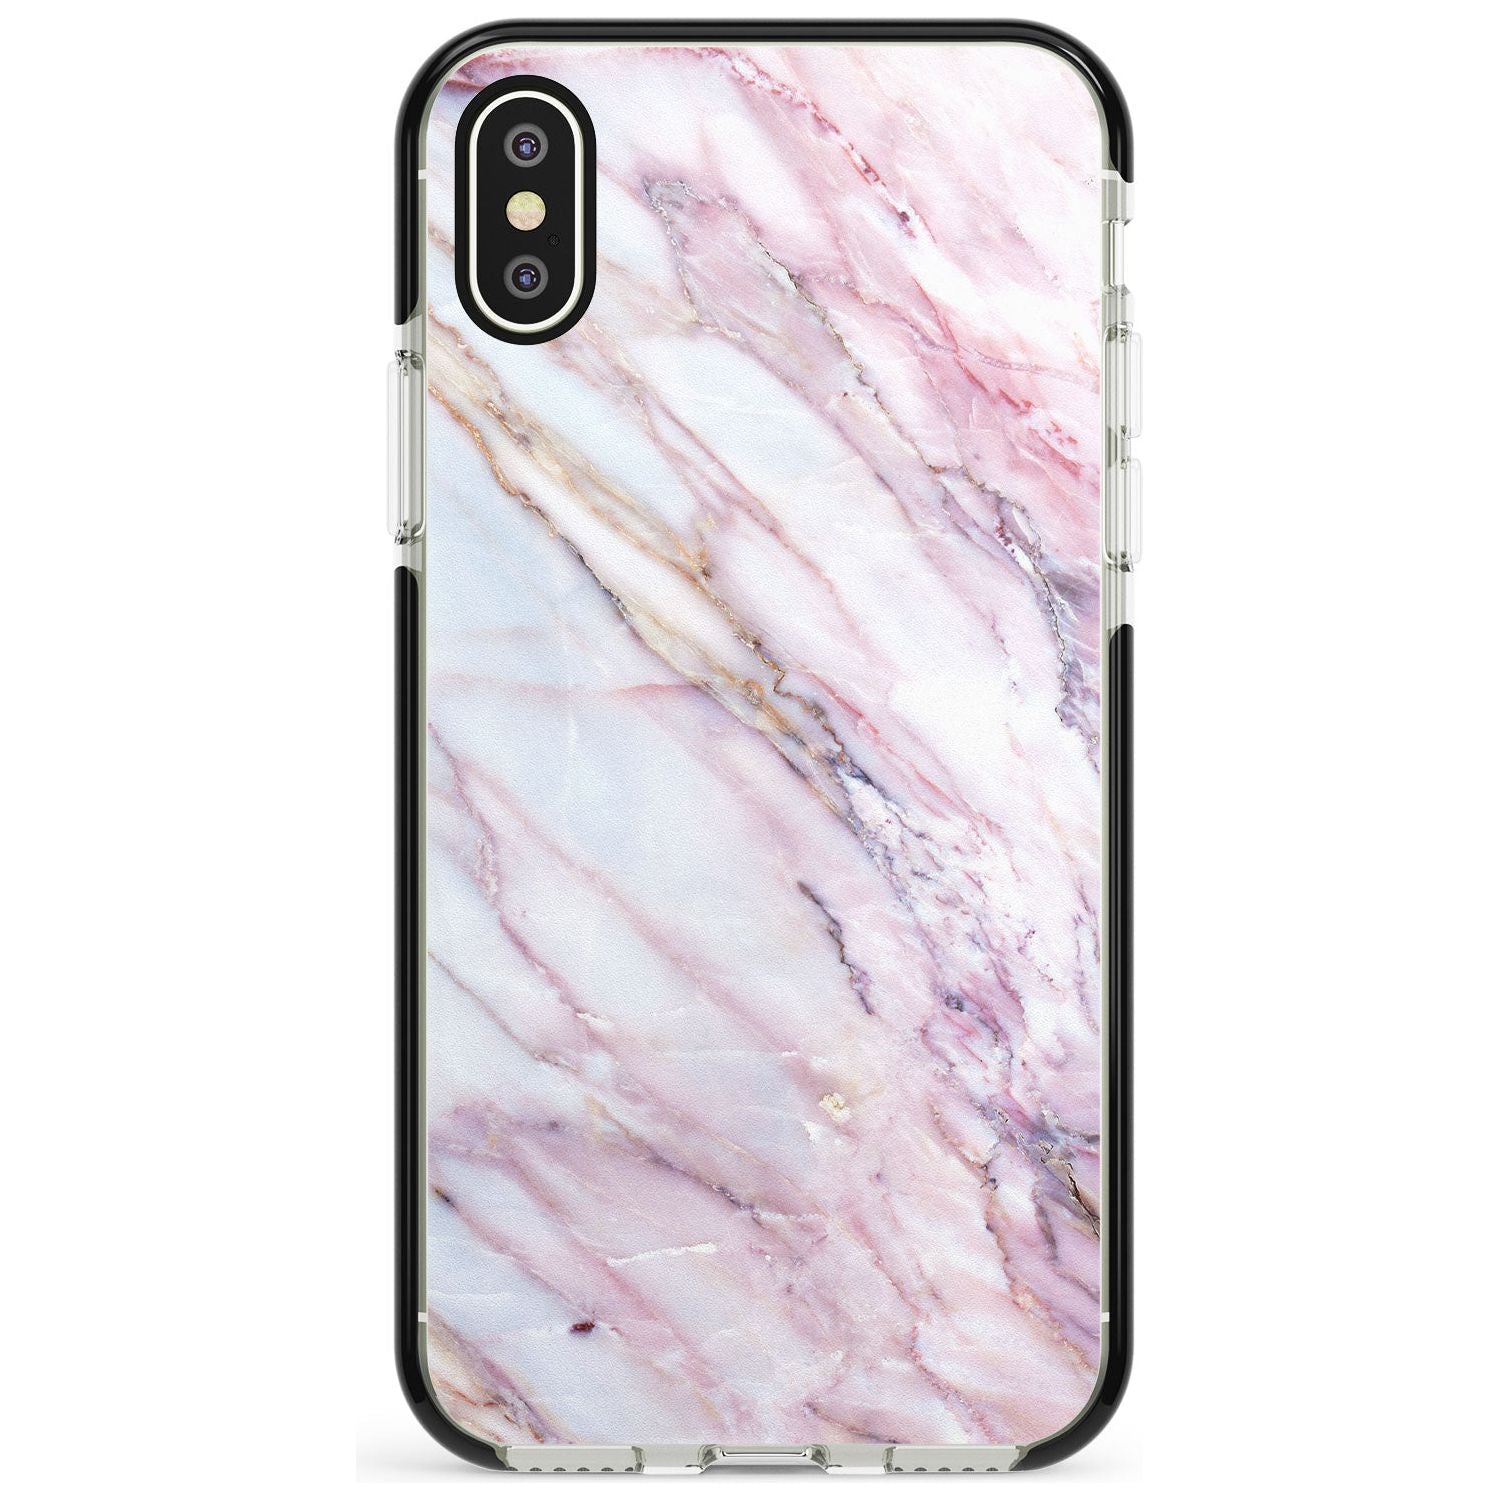 White, Pink & Purple Onyx Marble Texture Pink Fade Impact Phone Case for iPhone X XS Max XR